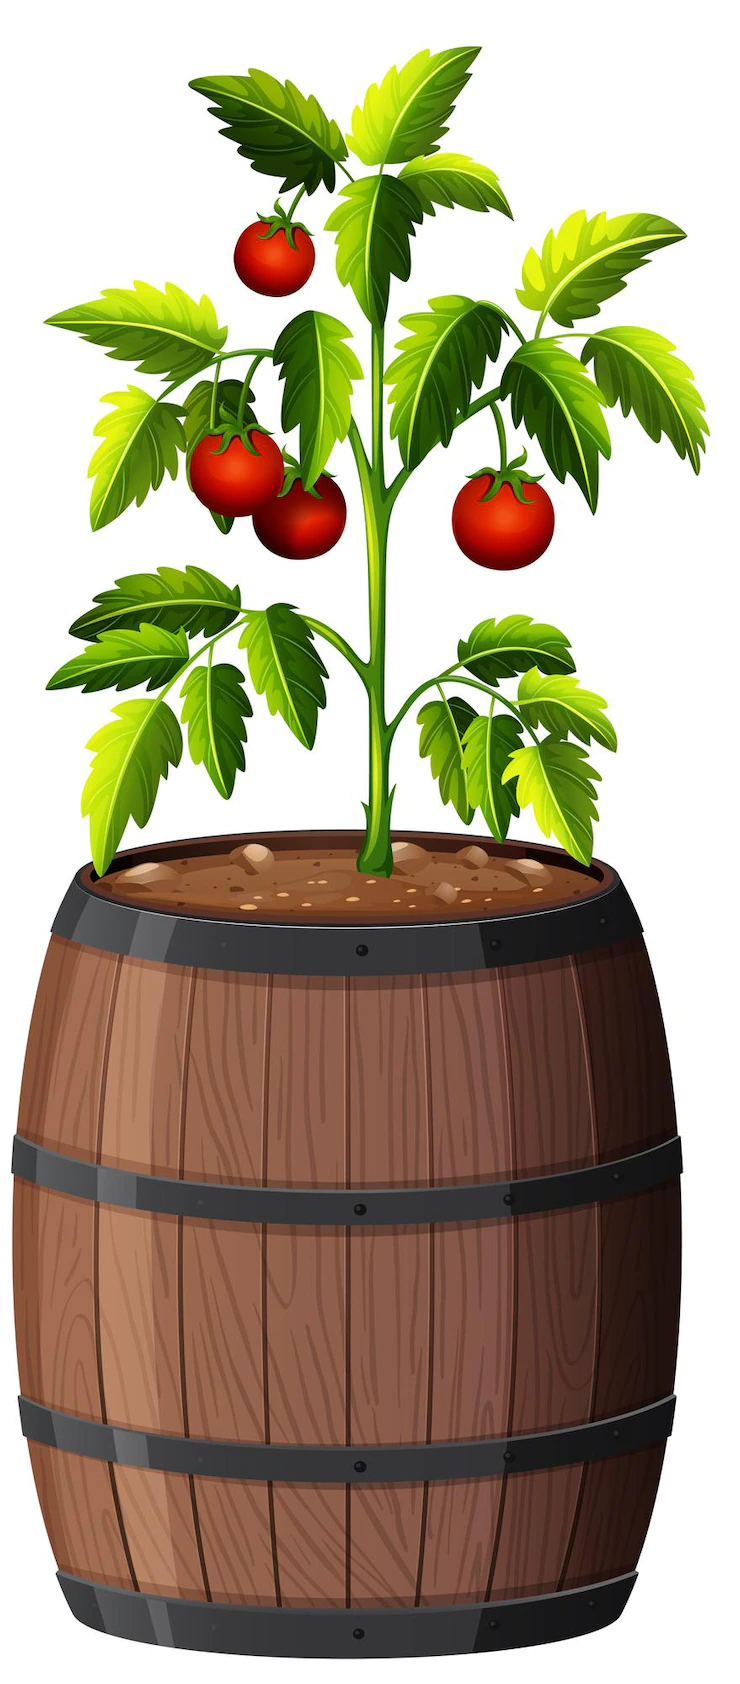 Tomatoes Plant Wooden Pot Isolated White Background 1308 52939